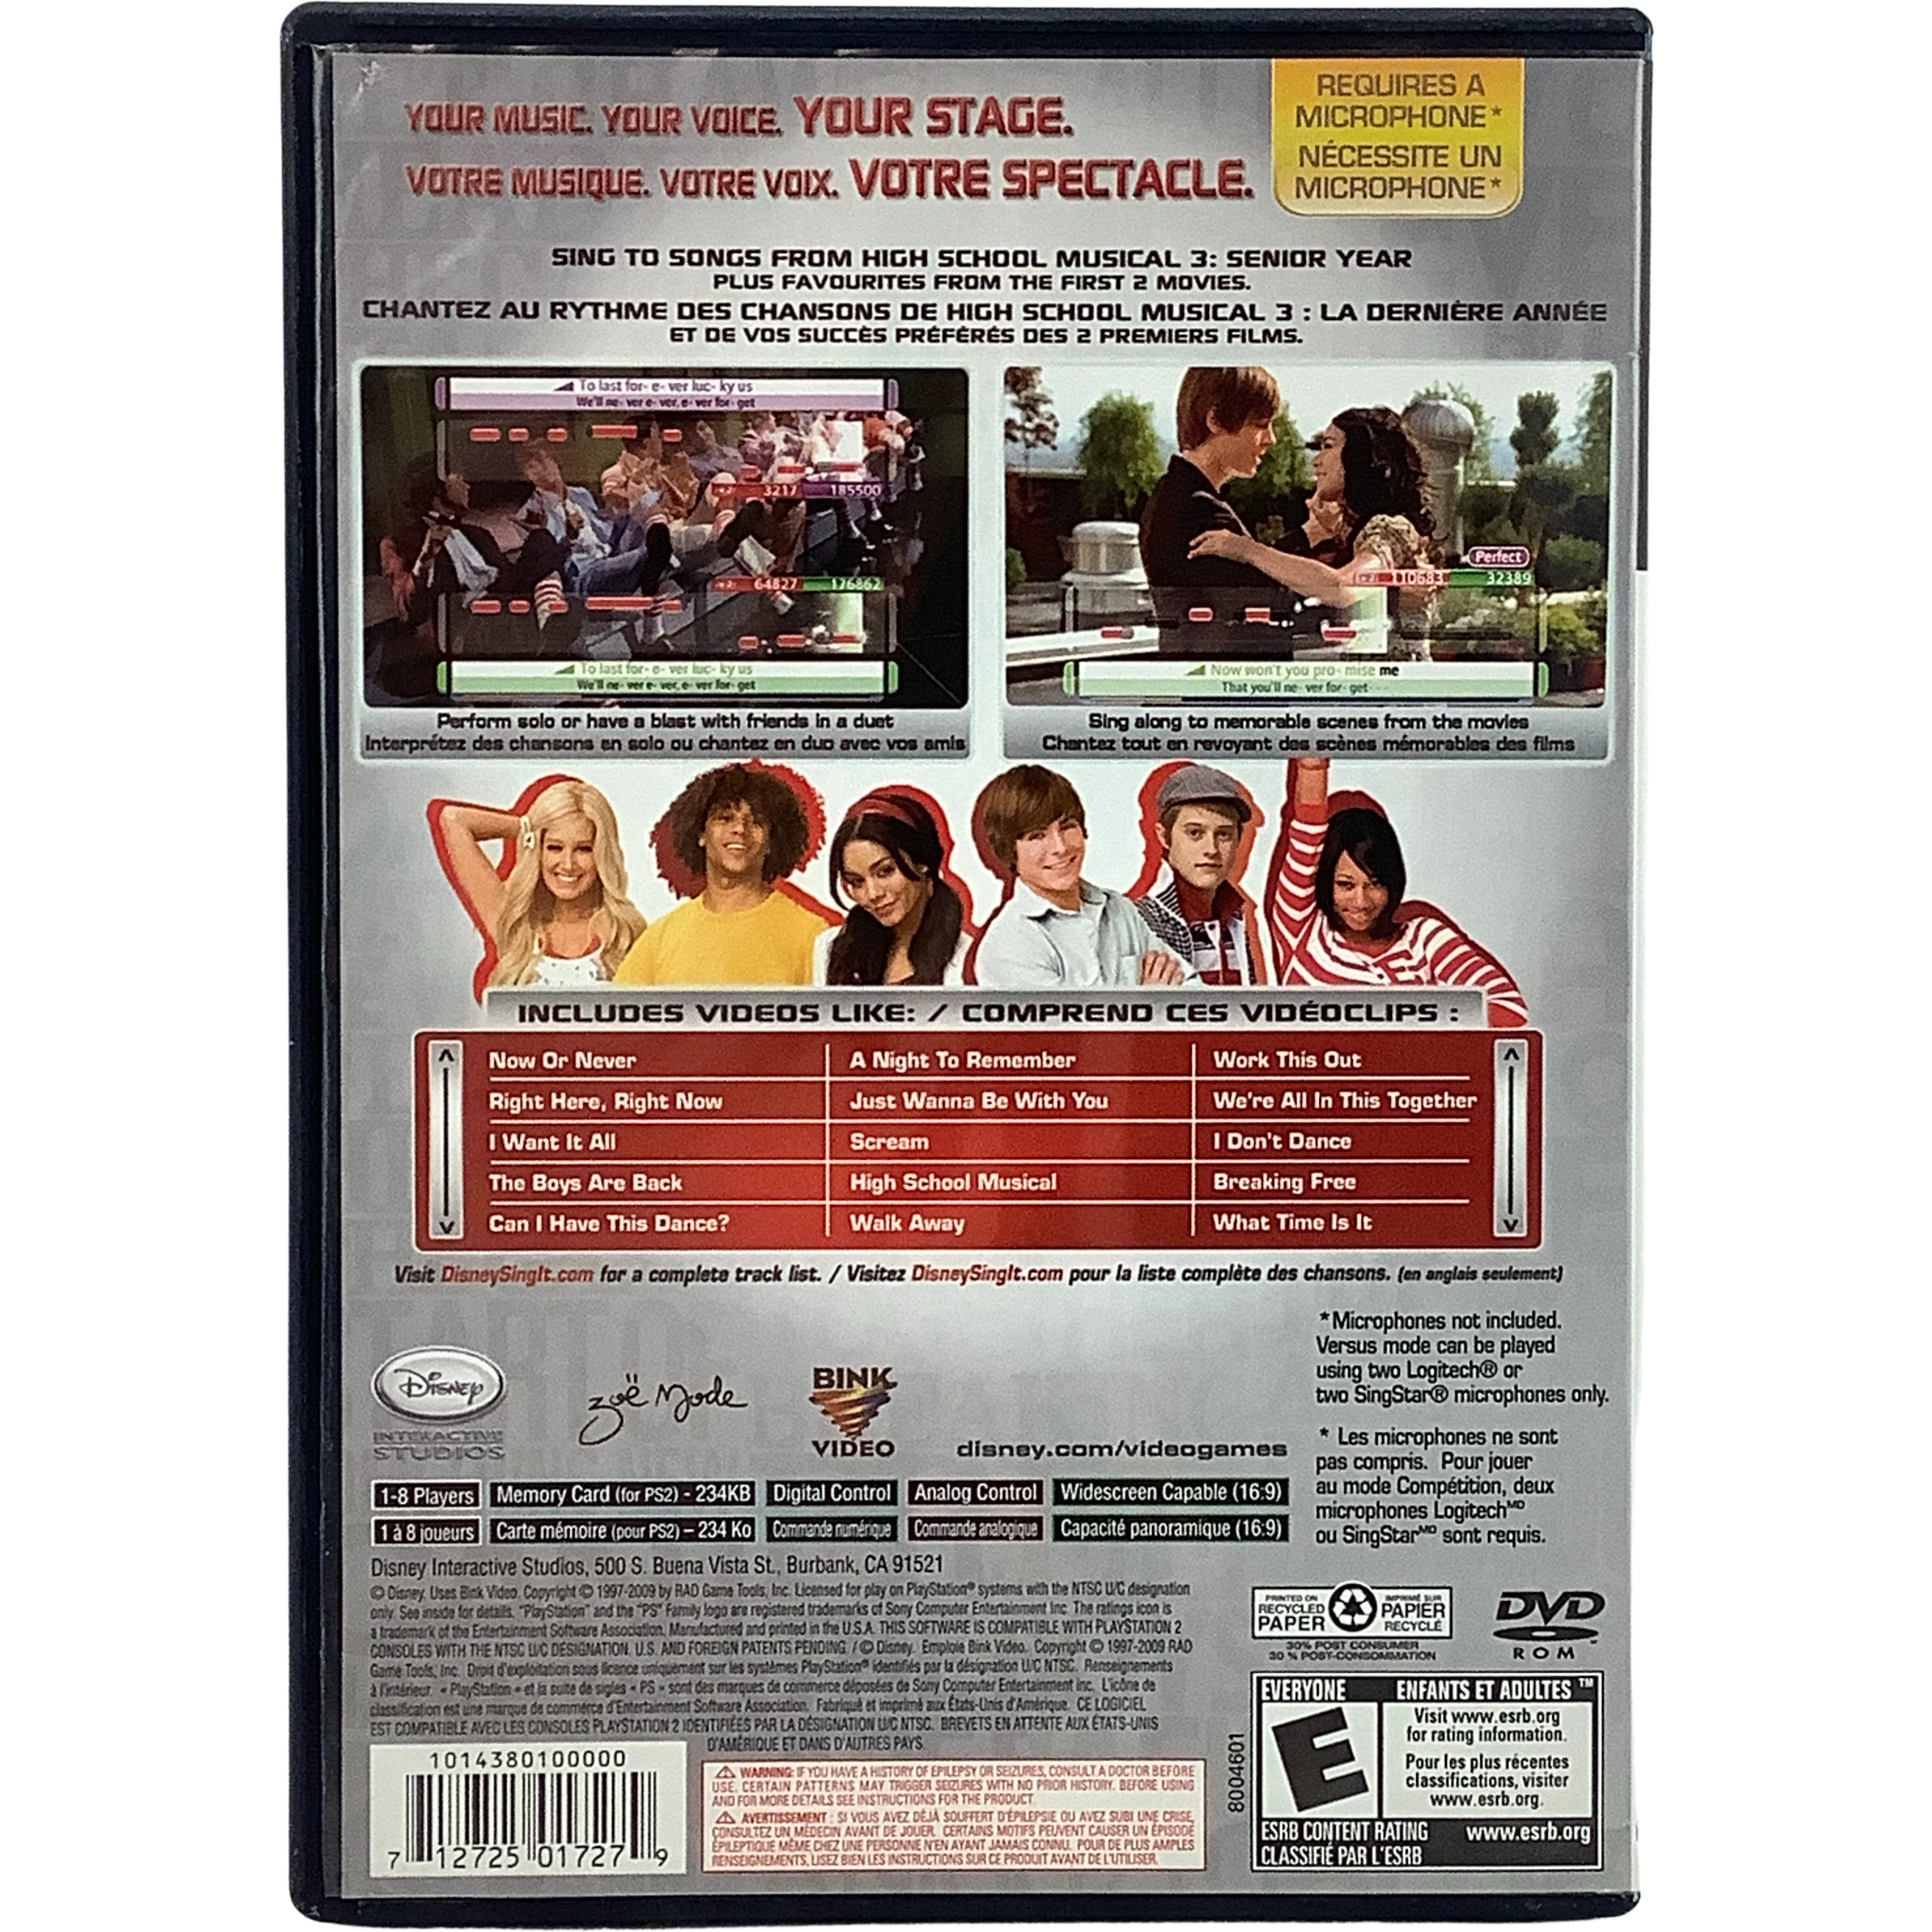 PlayStation 2 / "Sing It: High School Musical 3" Game / Video Game **USED**